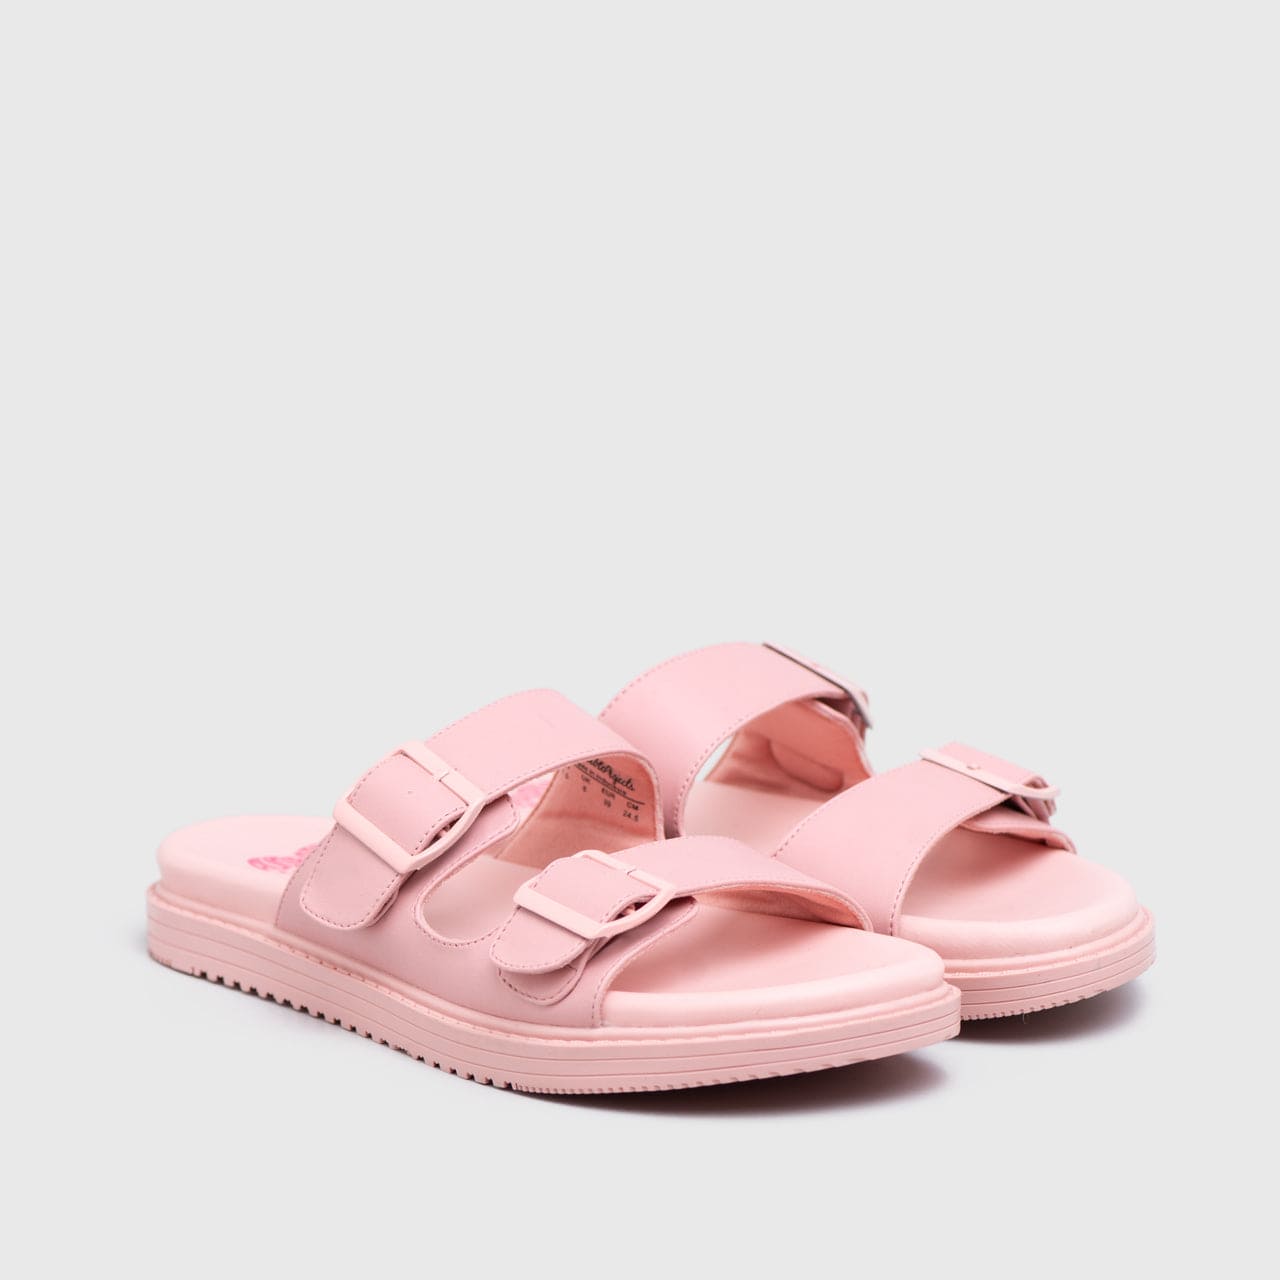 Adorable Projects Official 43 Adorableprojects - Claritaya Sandals Pink - Sendal Wanita